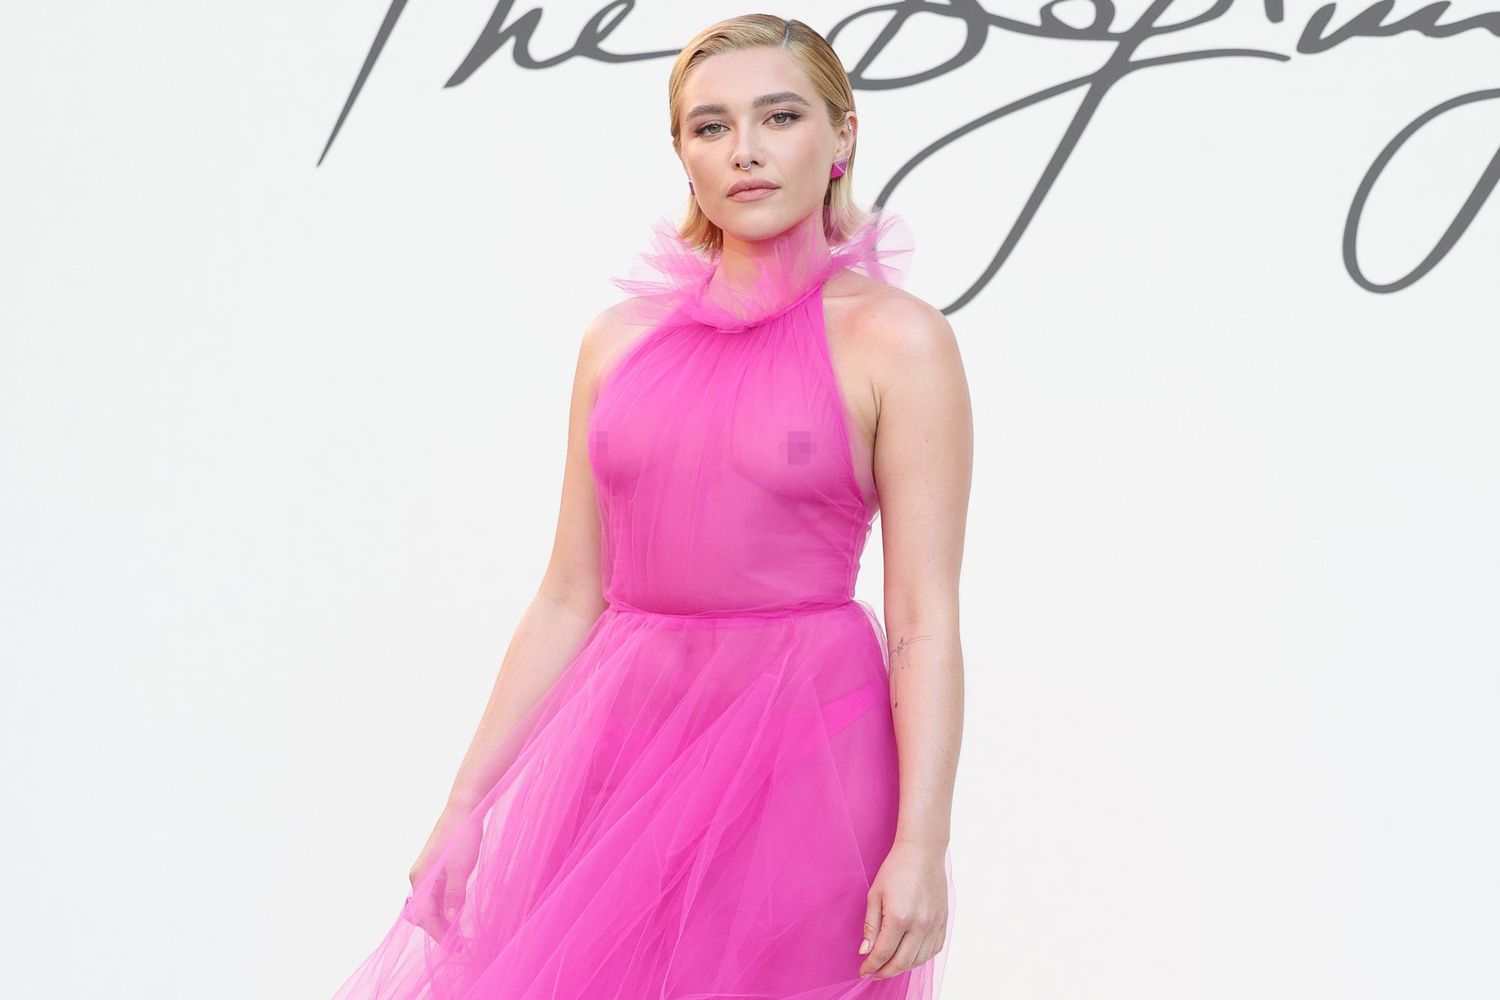 Florence Pugh Takes on the Barbie-Pink Trend in a Daringly Sheer Dress – See Photos